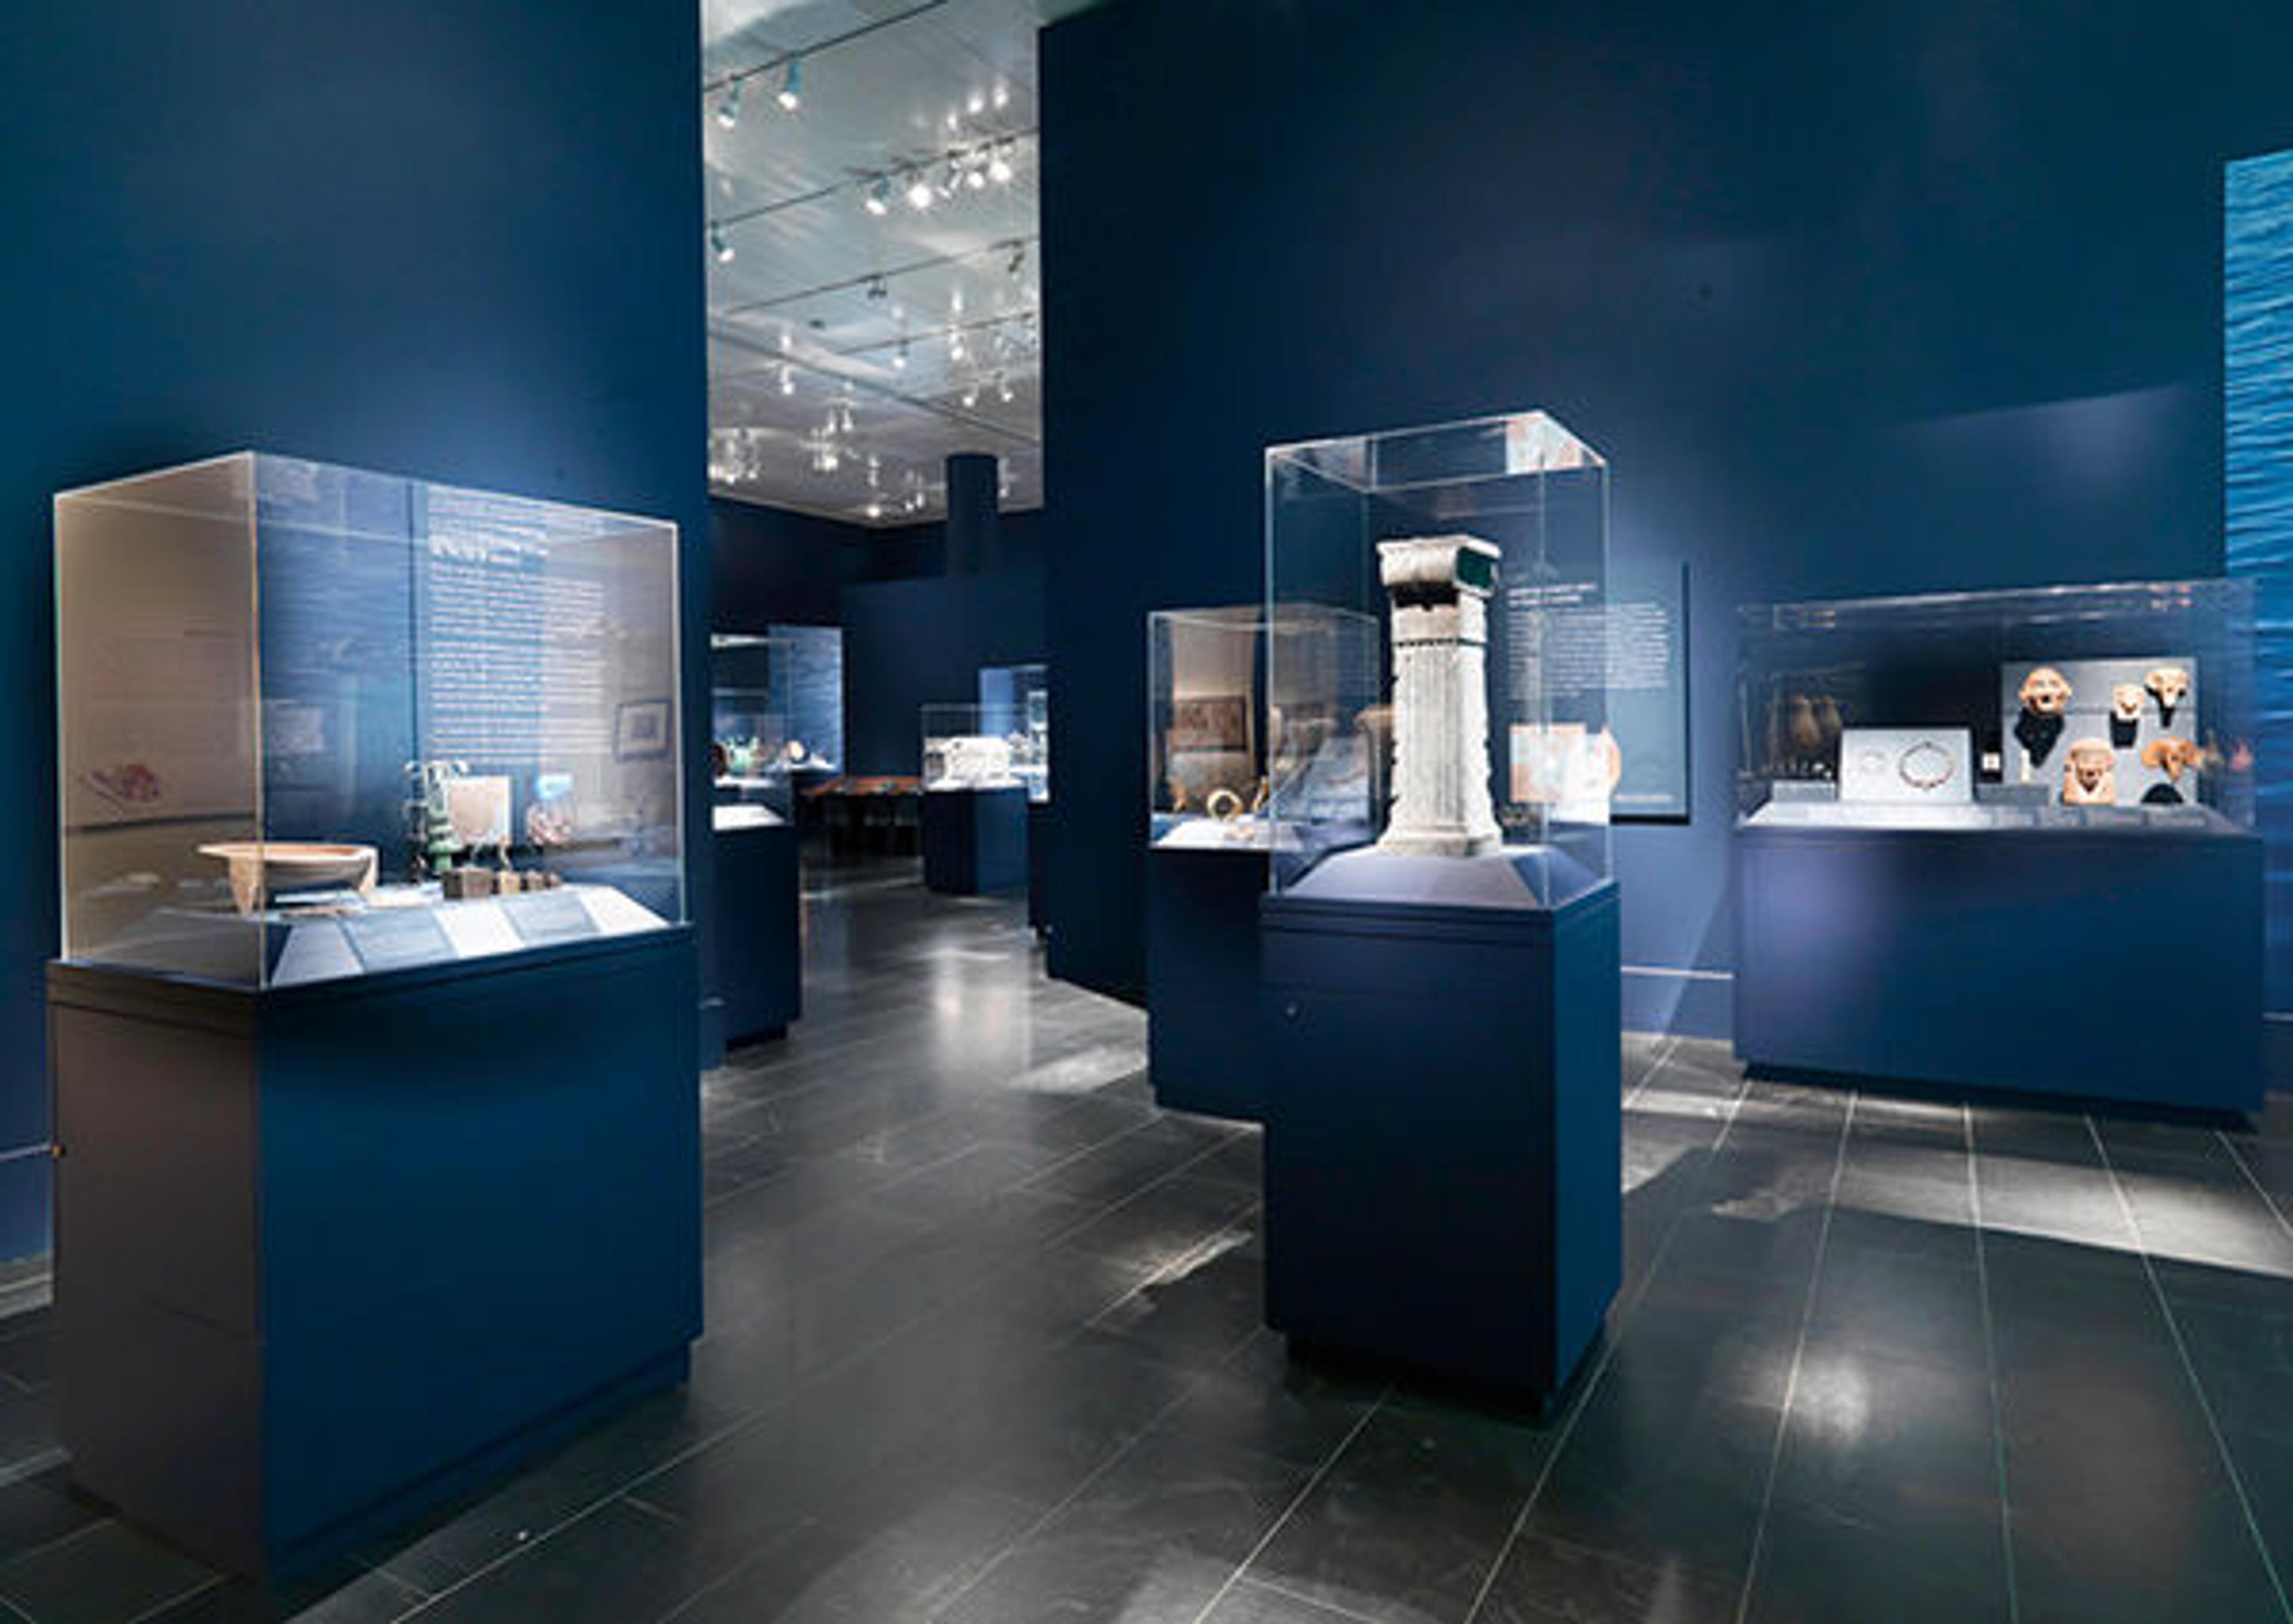 Installation view of Assyria to Iberia at the Dawn of the Classical Age (September 22, 2014–January 4, 2015), as installed in the Iris and B. Gerald Cantor Gallery